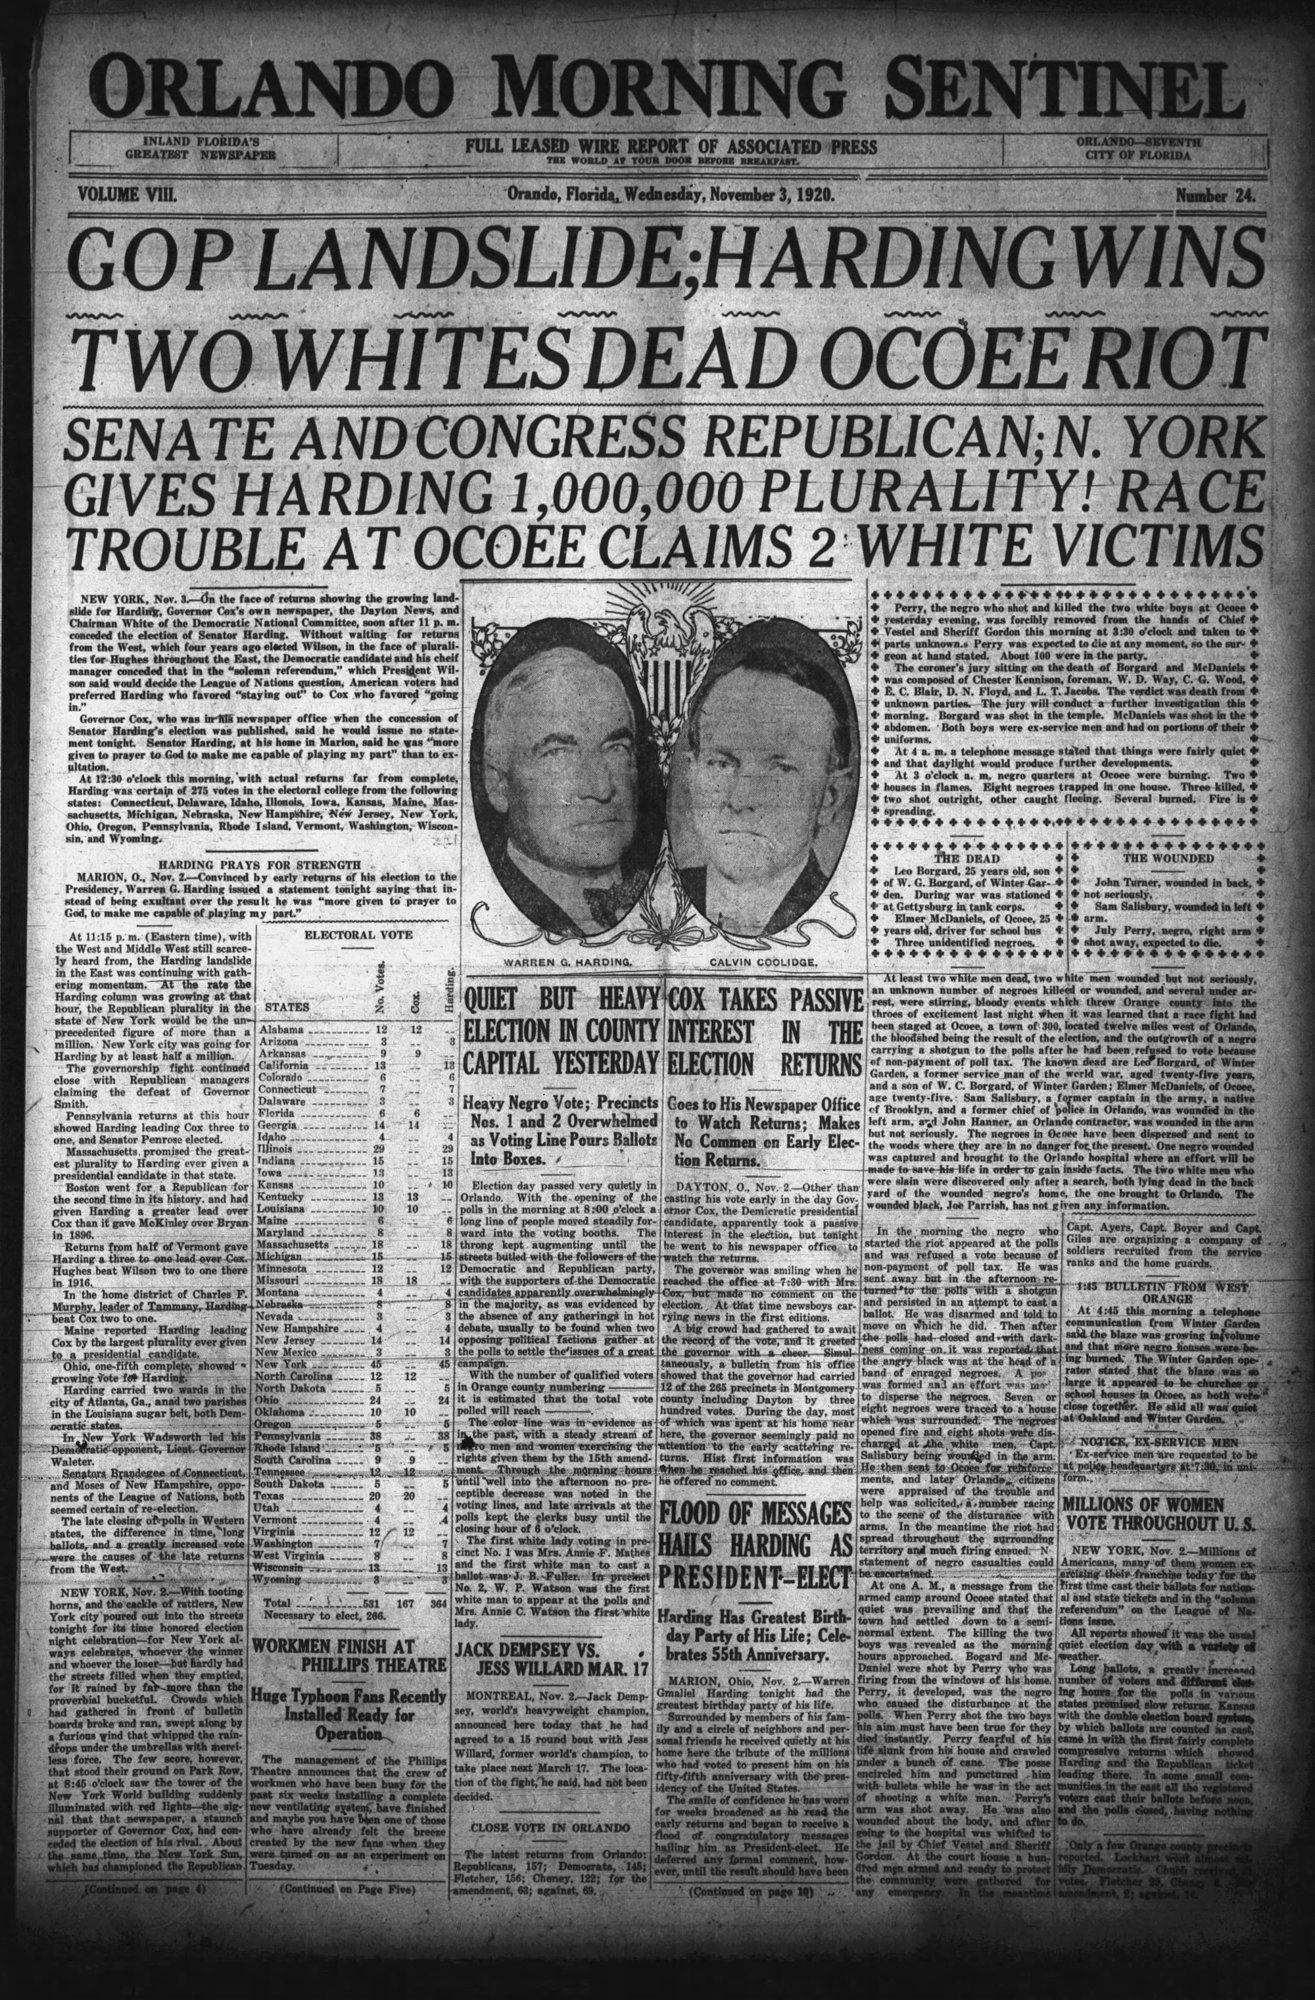 The headline of the Nov. 3 edition of the Orlando Morning Sentinel only makes note of the two white men who died,  while labeling the massacre as the 